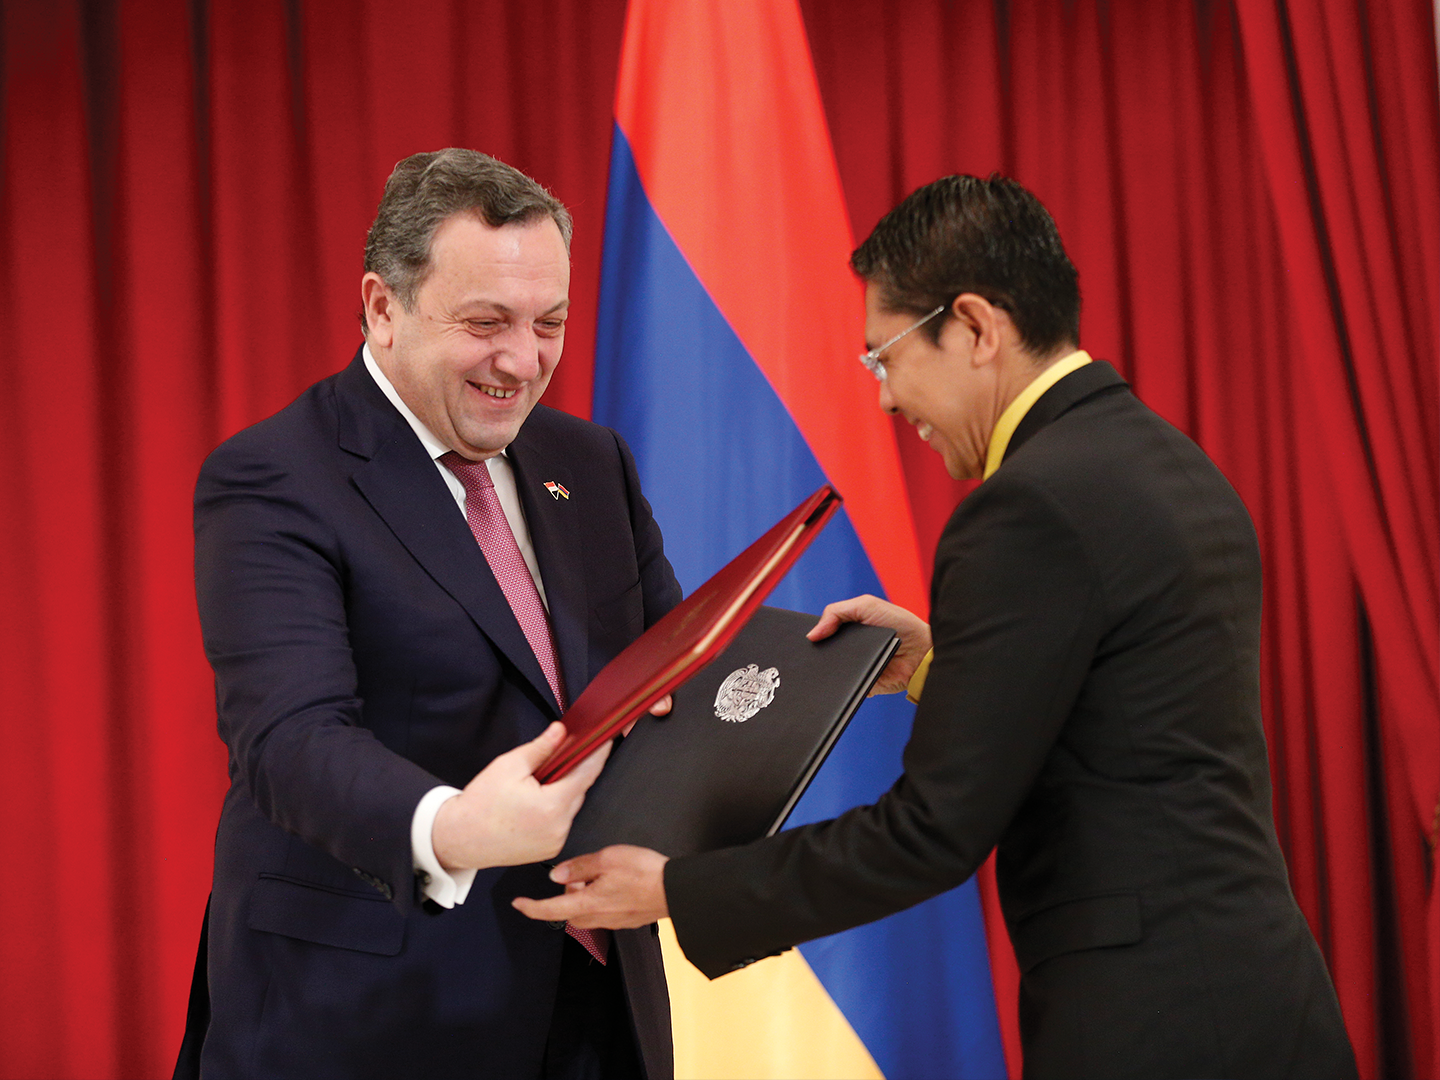 Deputy Minister of Foreign Affairs of Armenia Avet Adonts and Senior Minister of Defense and Foreign Affairs of Singapore Maliki Osman exchange memorandums of understanding.